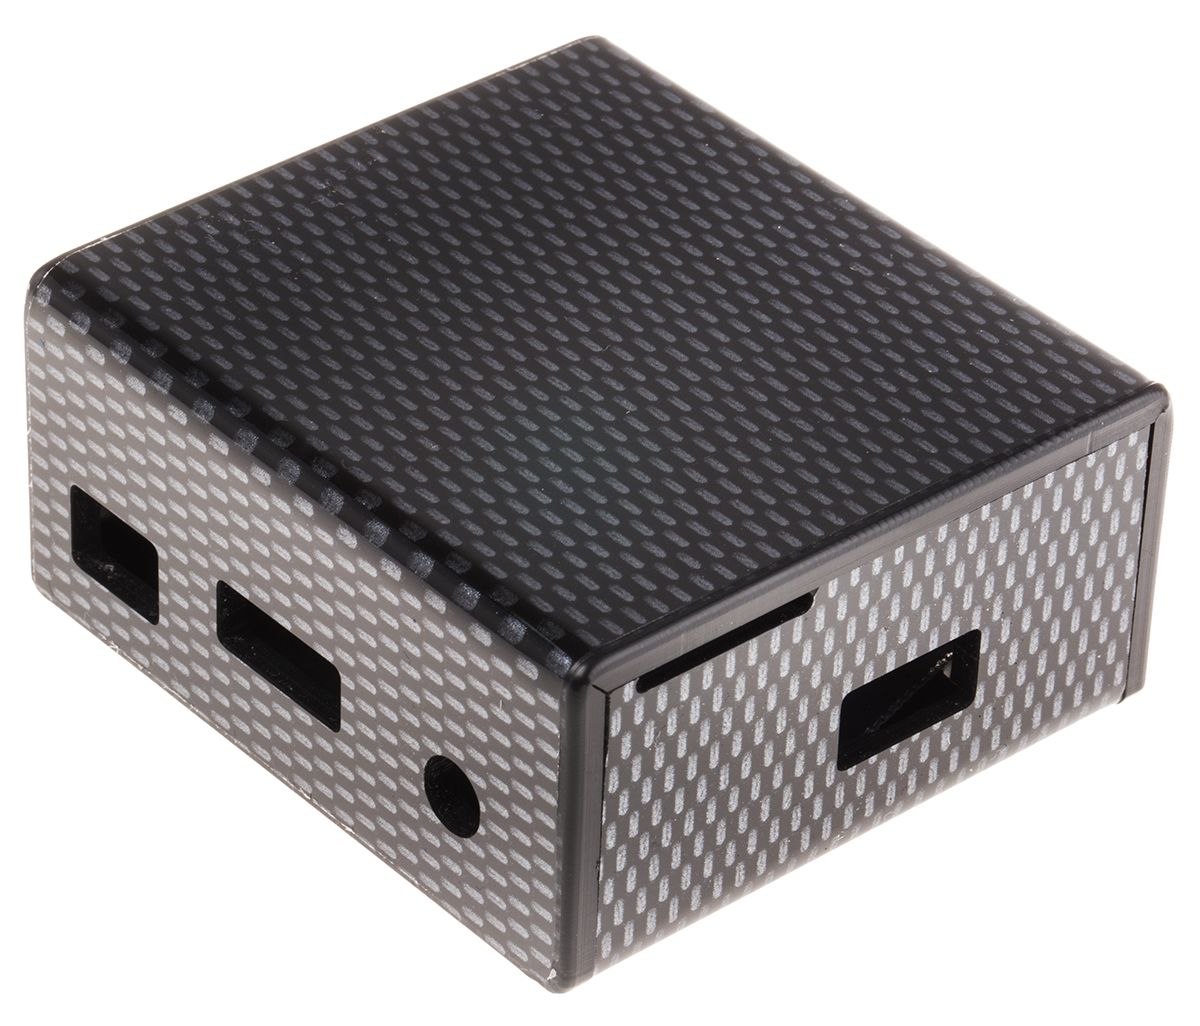 RS PRO ABS Case for use with Raspberry Pi A+ in Carbon Fibre